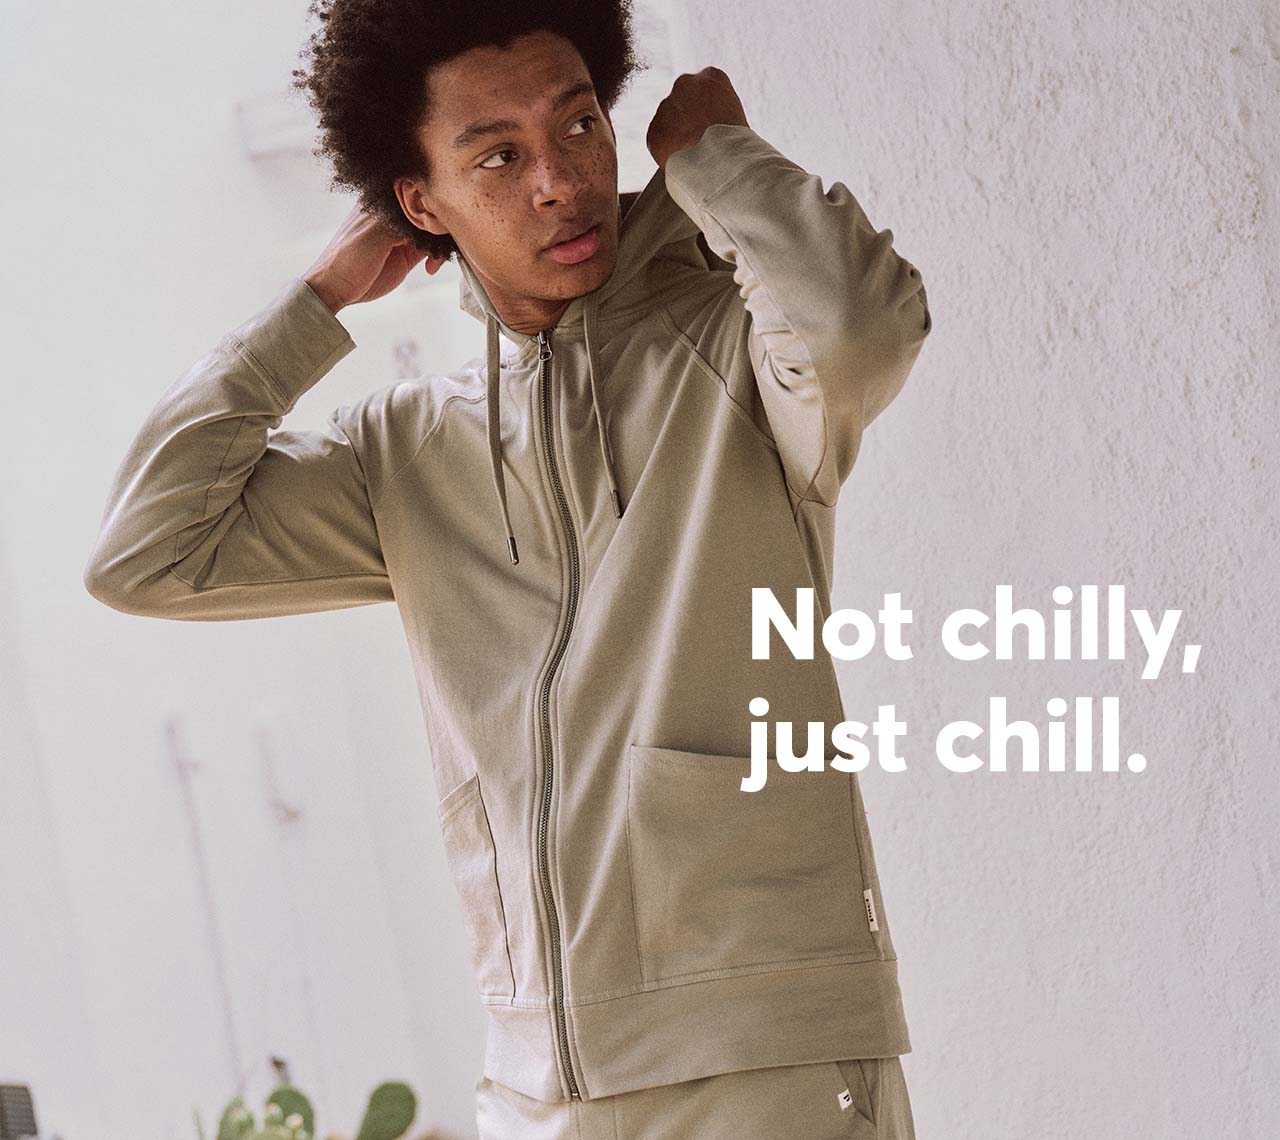 Not chilly, just chill.